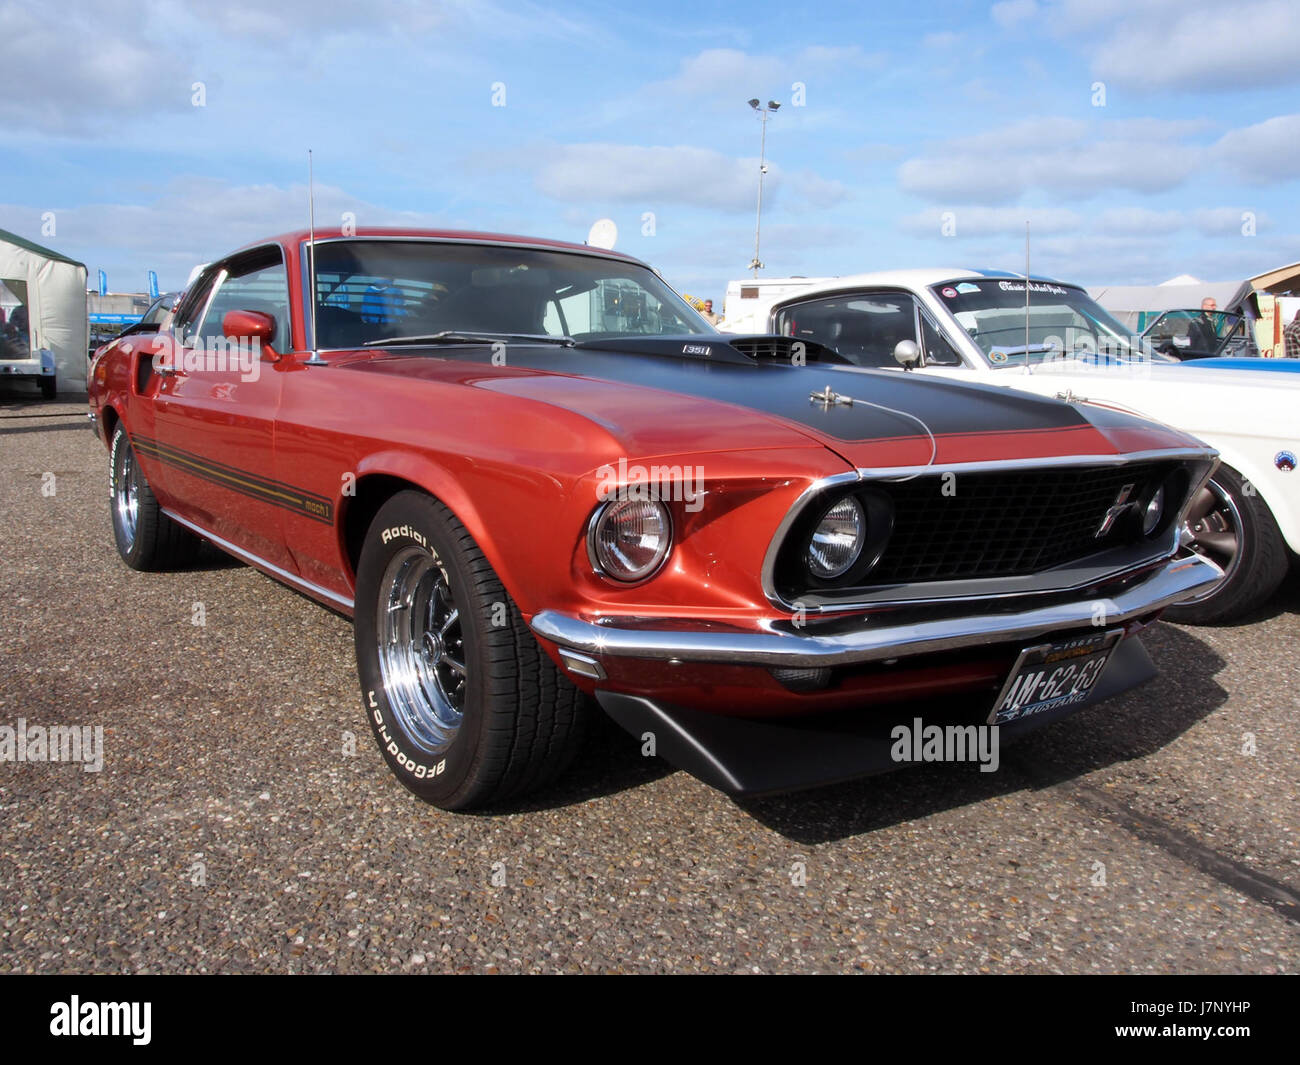 1969 Ford Mustang Mach 1 pic1 Stock Photo